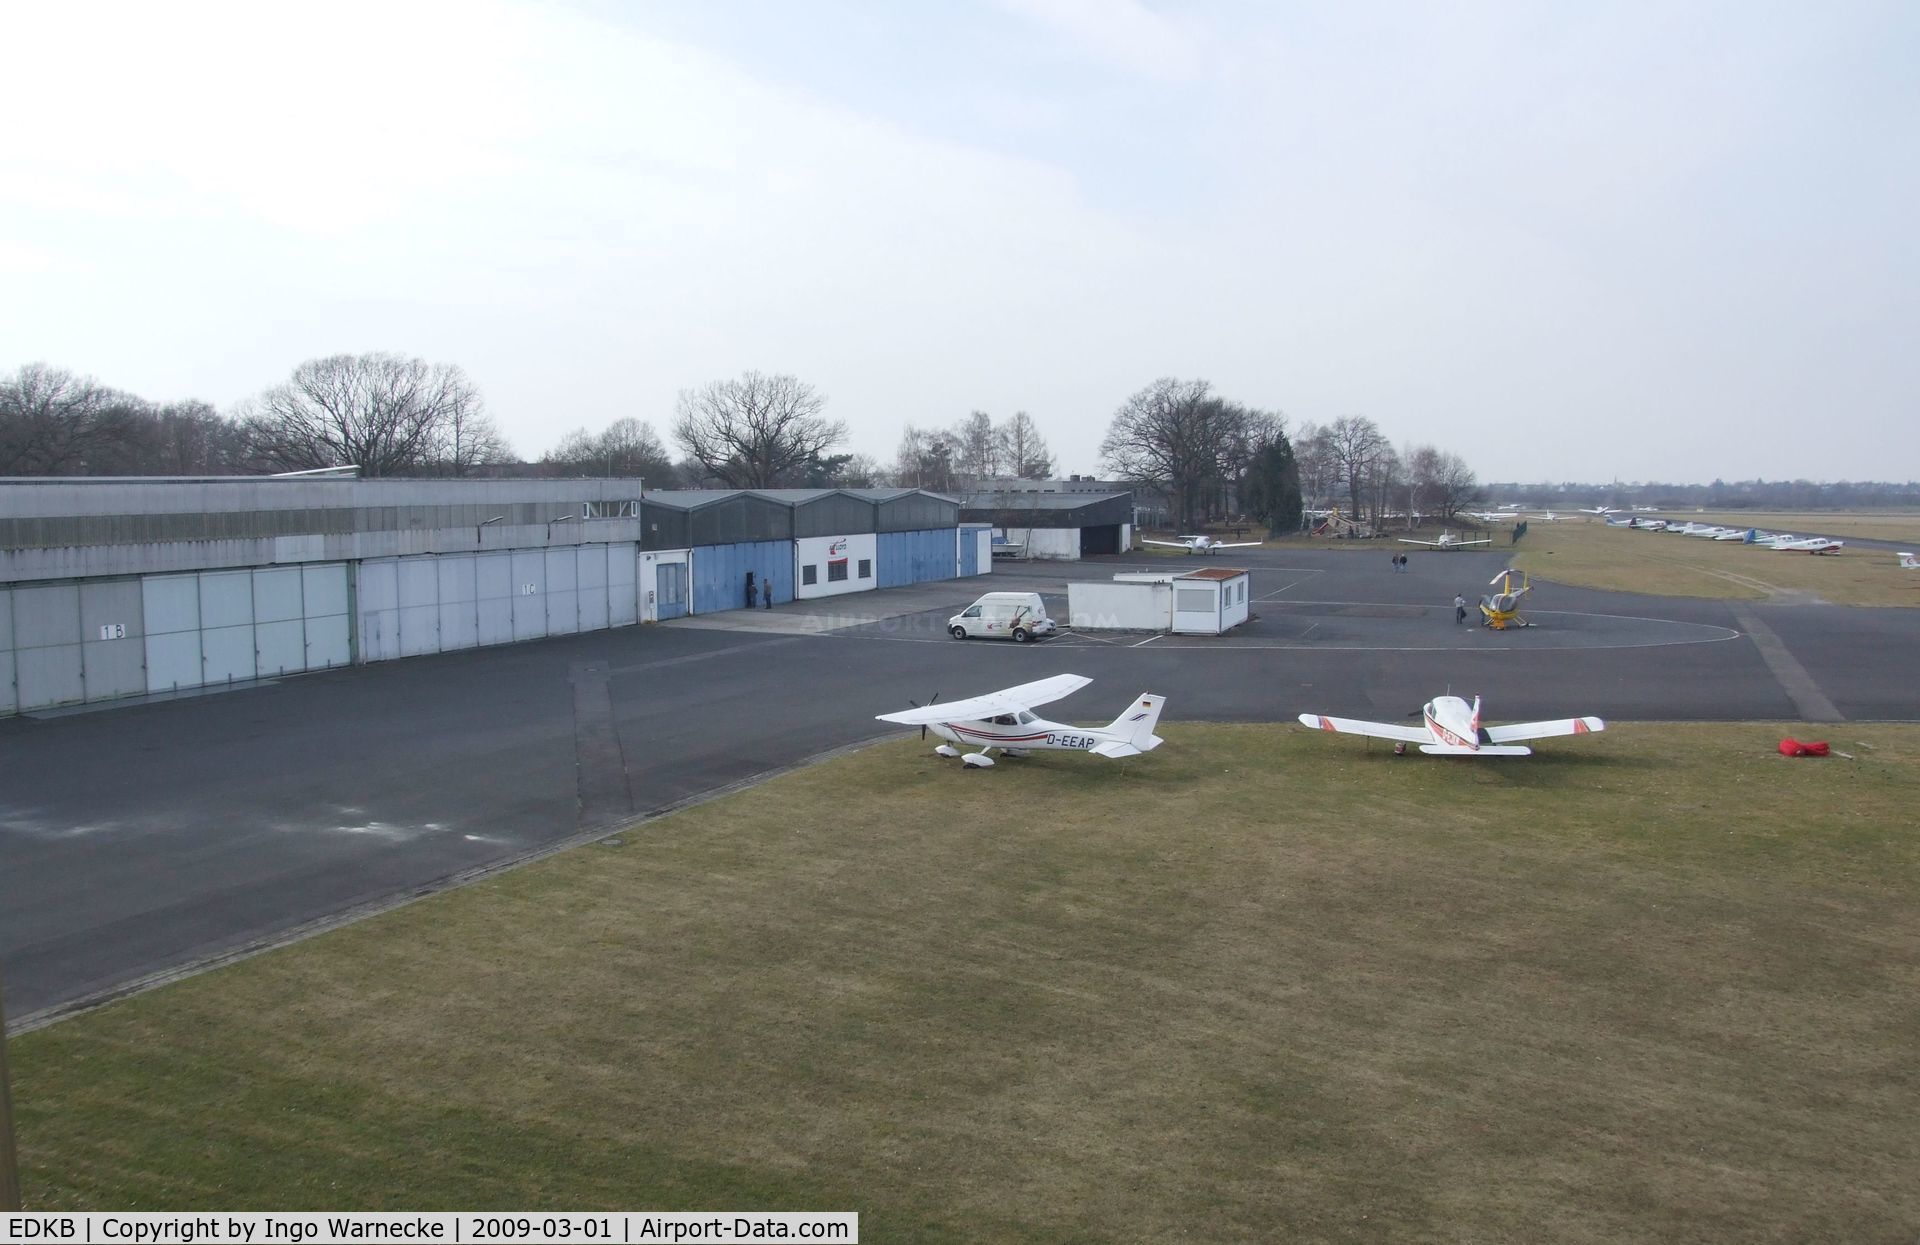 Bonn-Hangelar Airport, Sankt Augustin Germany (EDKB) - hangars and apron in the north-western part